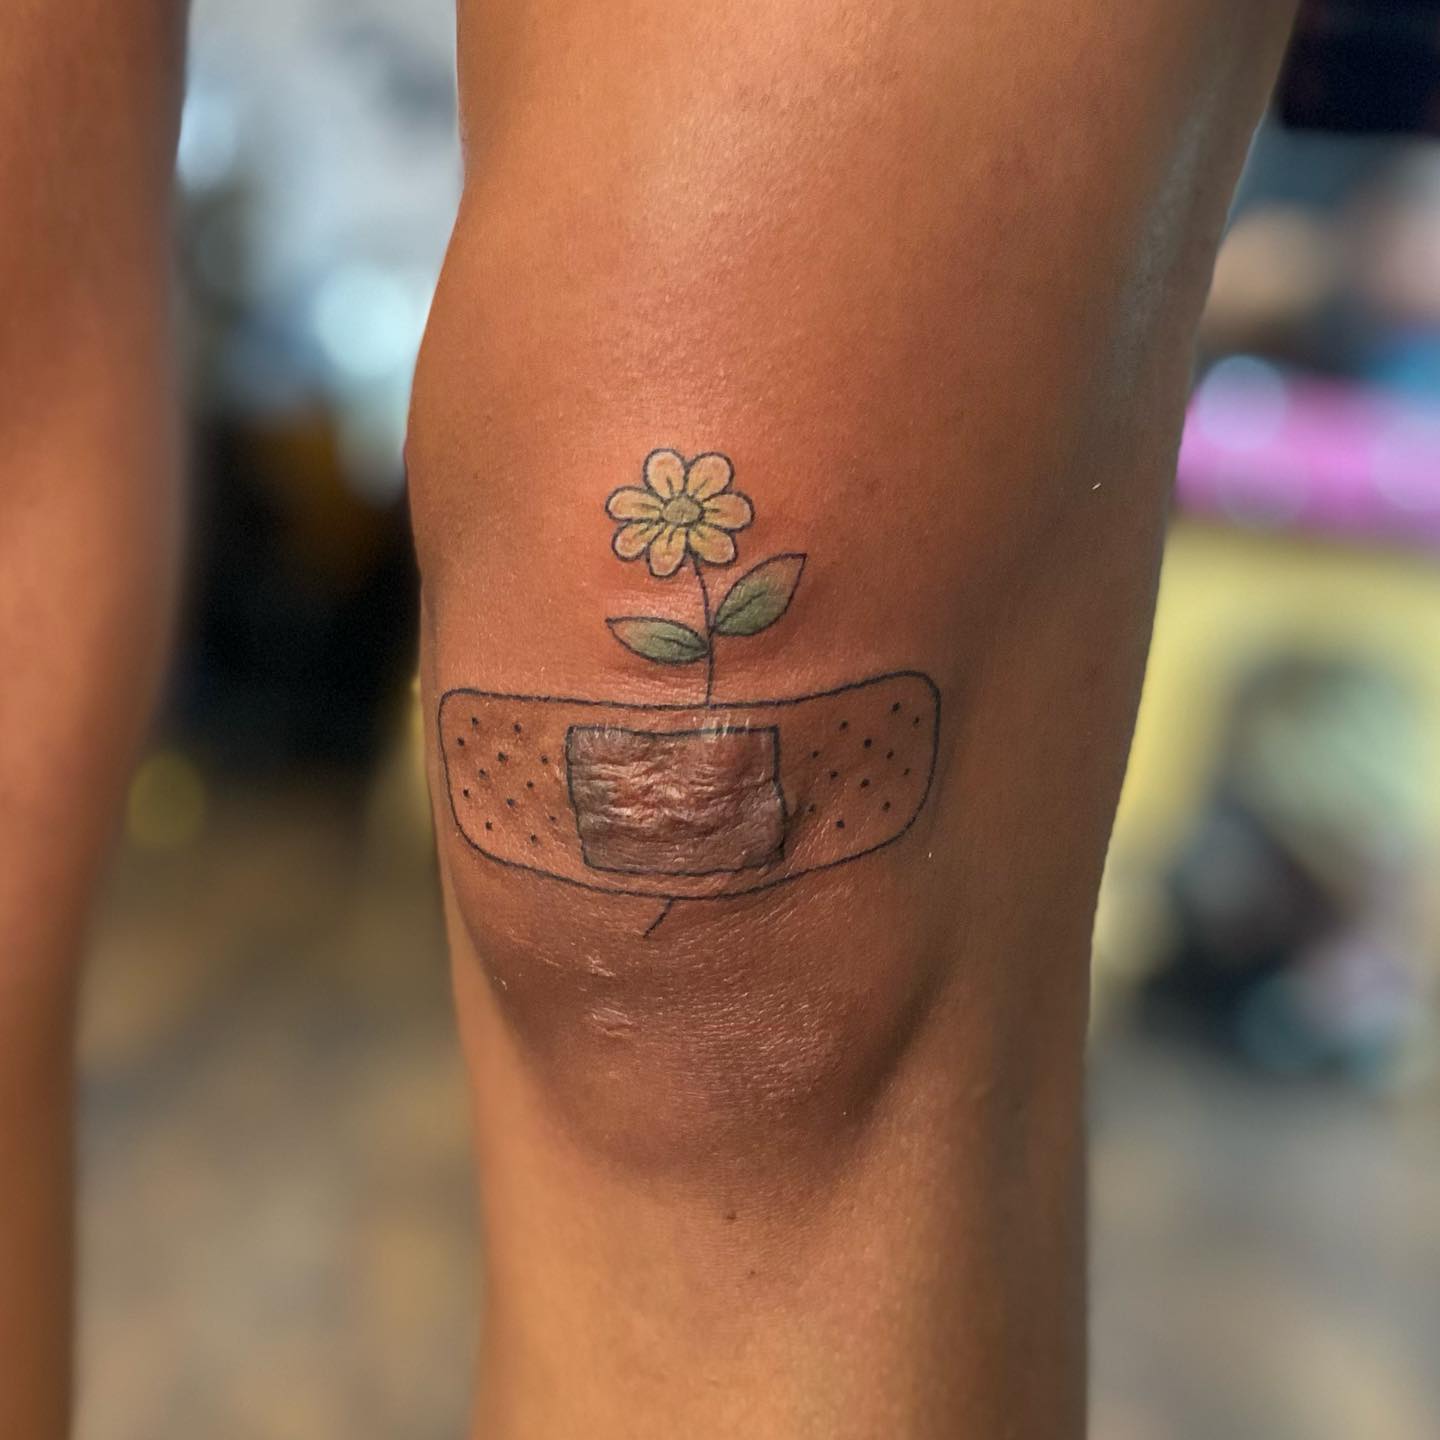 Do you want to heal? If so, why not try out this tattoo that can represent your journey? Guys who have had an issue of some sort will enjoy this design. Show that you can heal and that all of us can change as time goes on. The key is in staying patient.